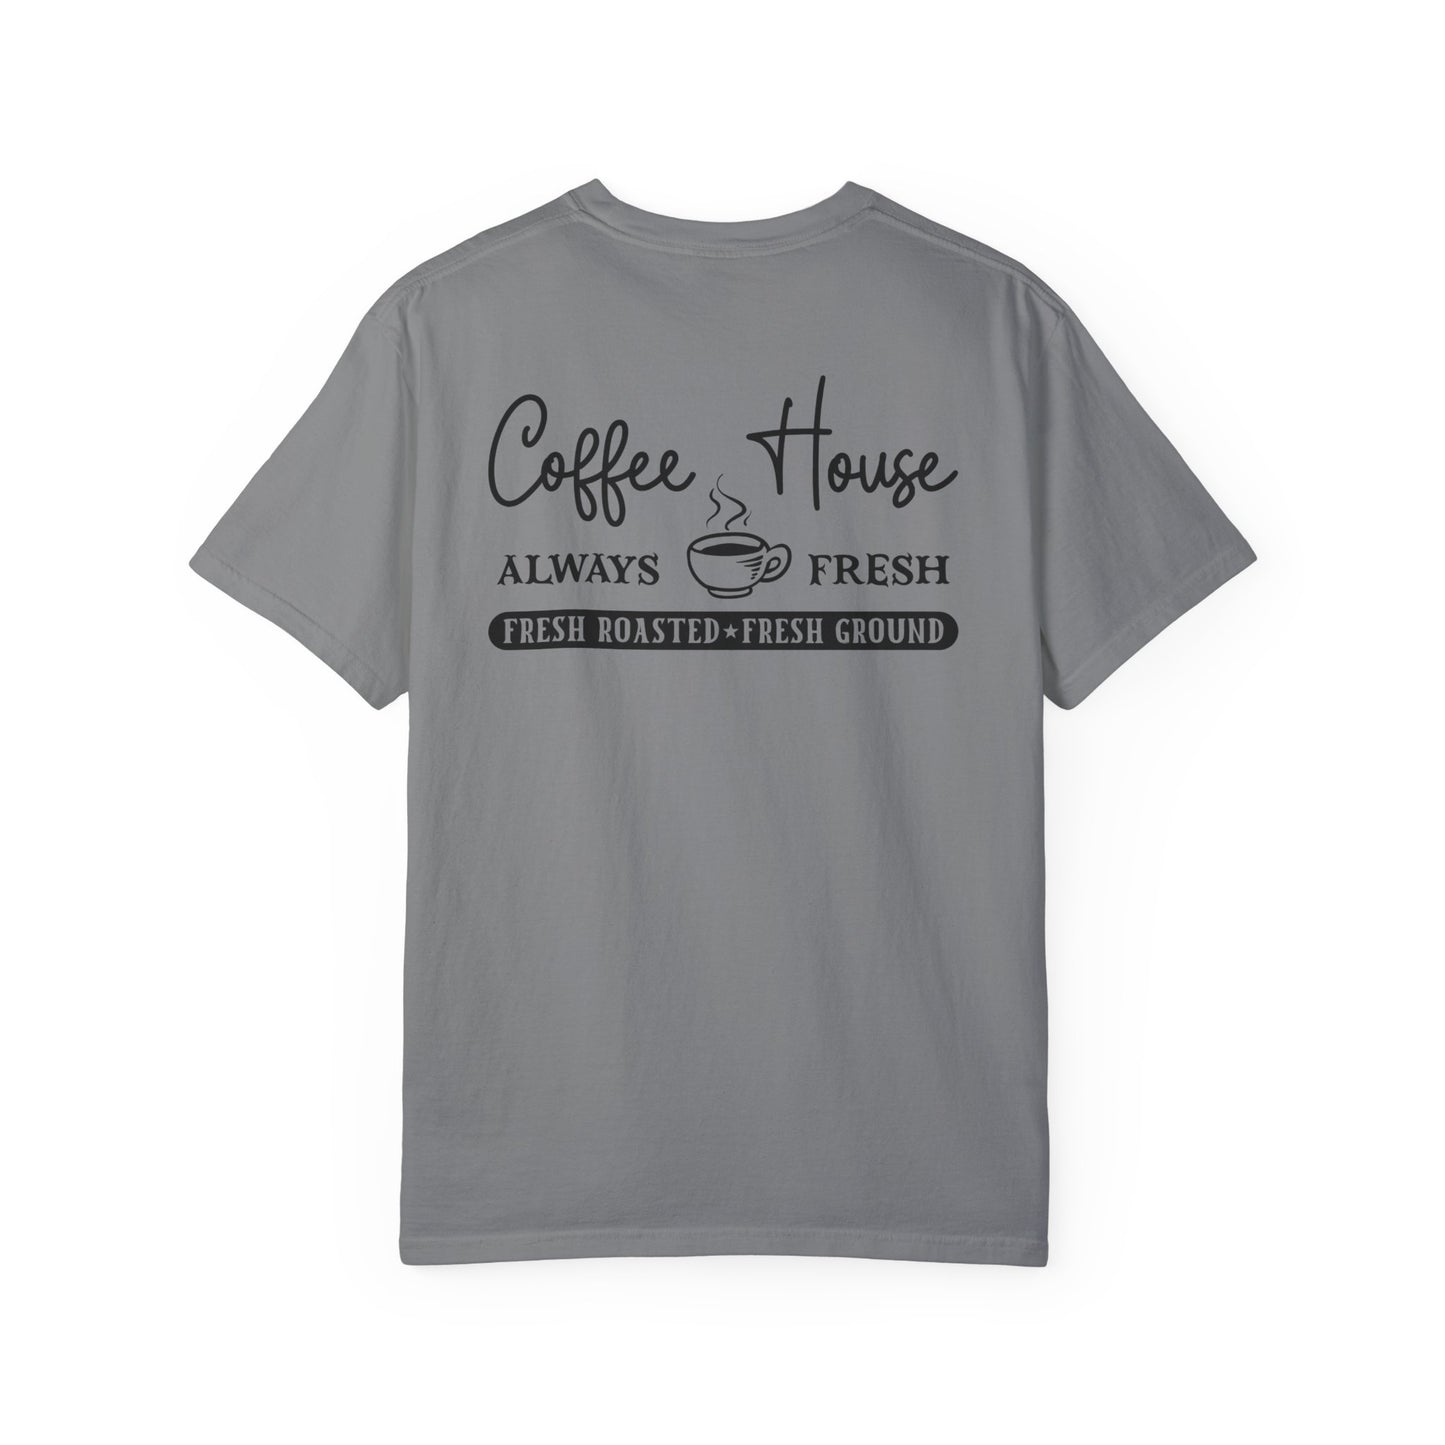 Blue Collar Boutiques Coffee House Tee